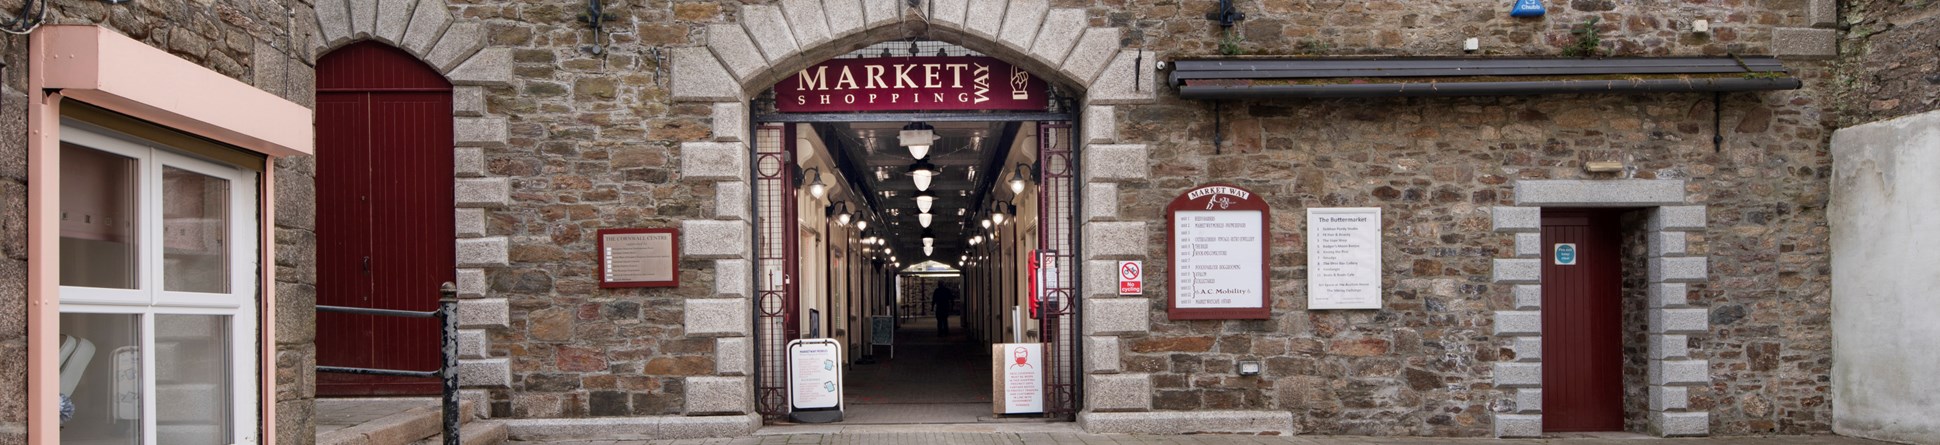 The entrance to a historic covered market building